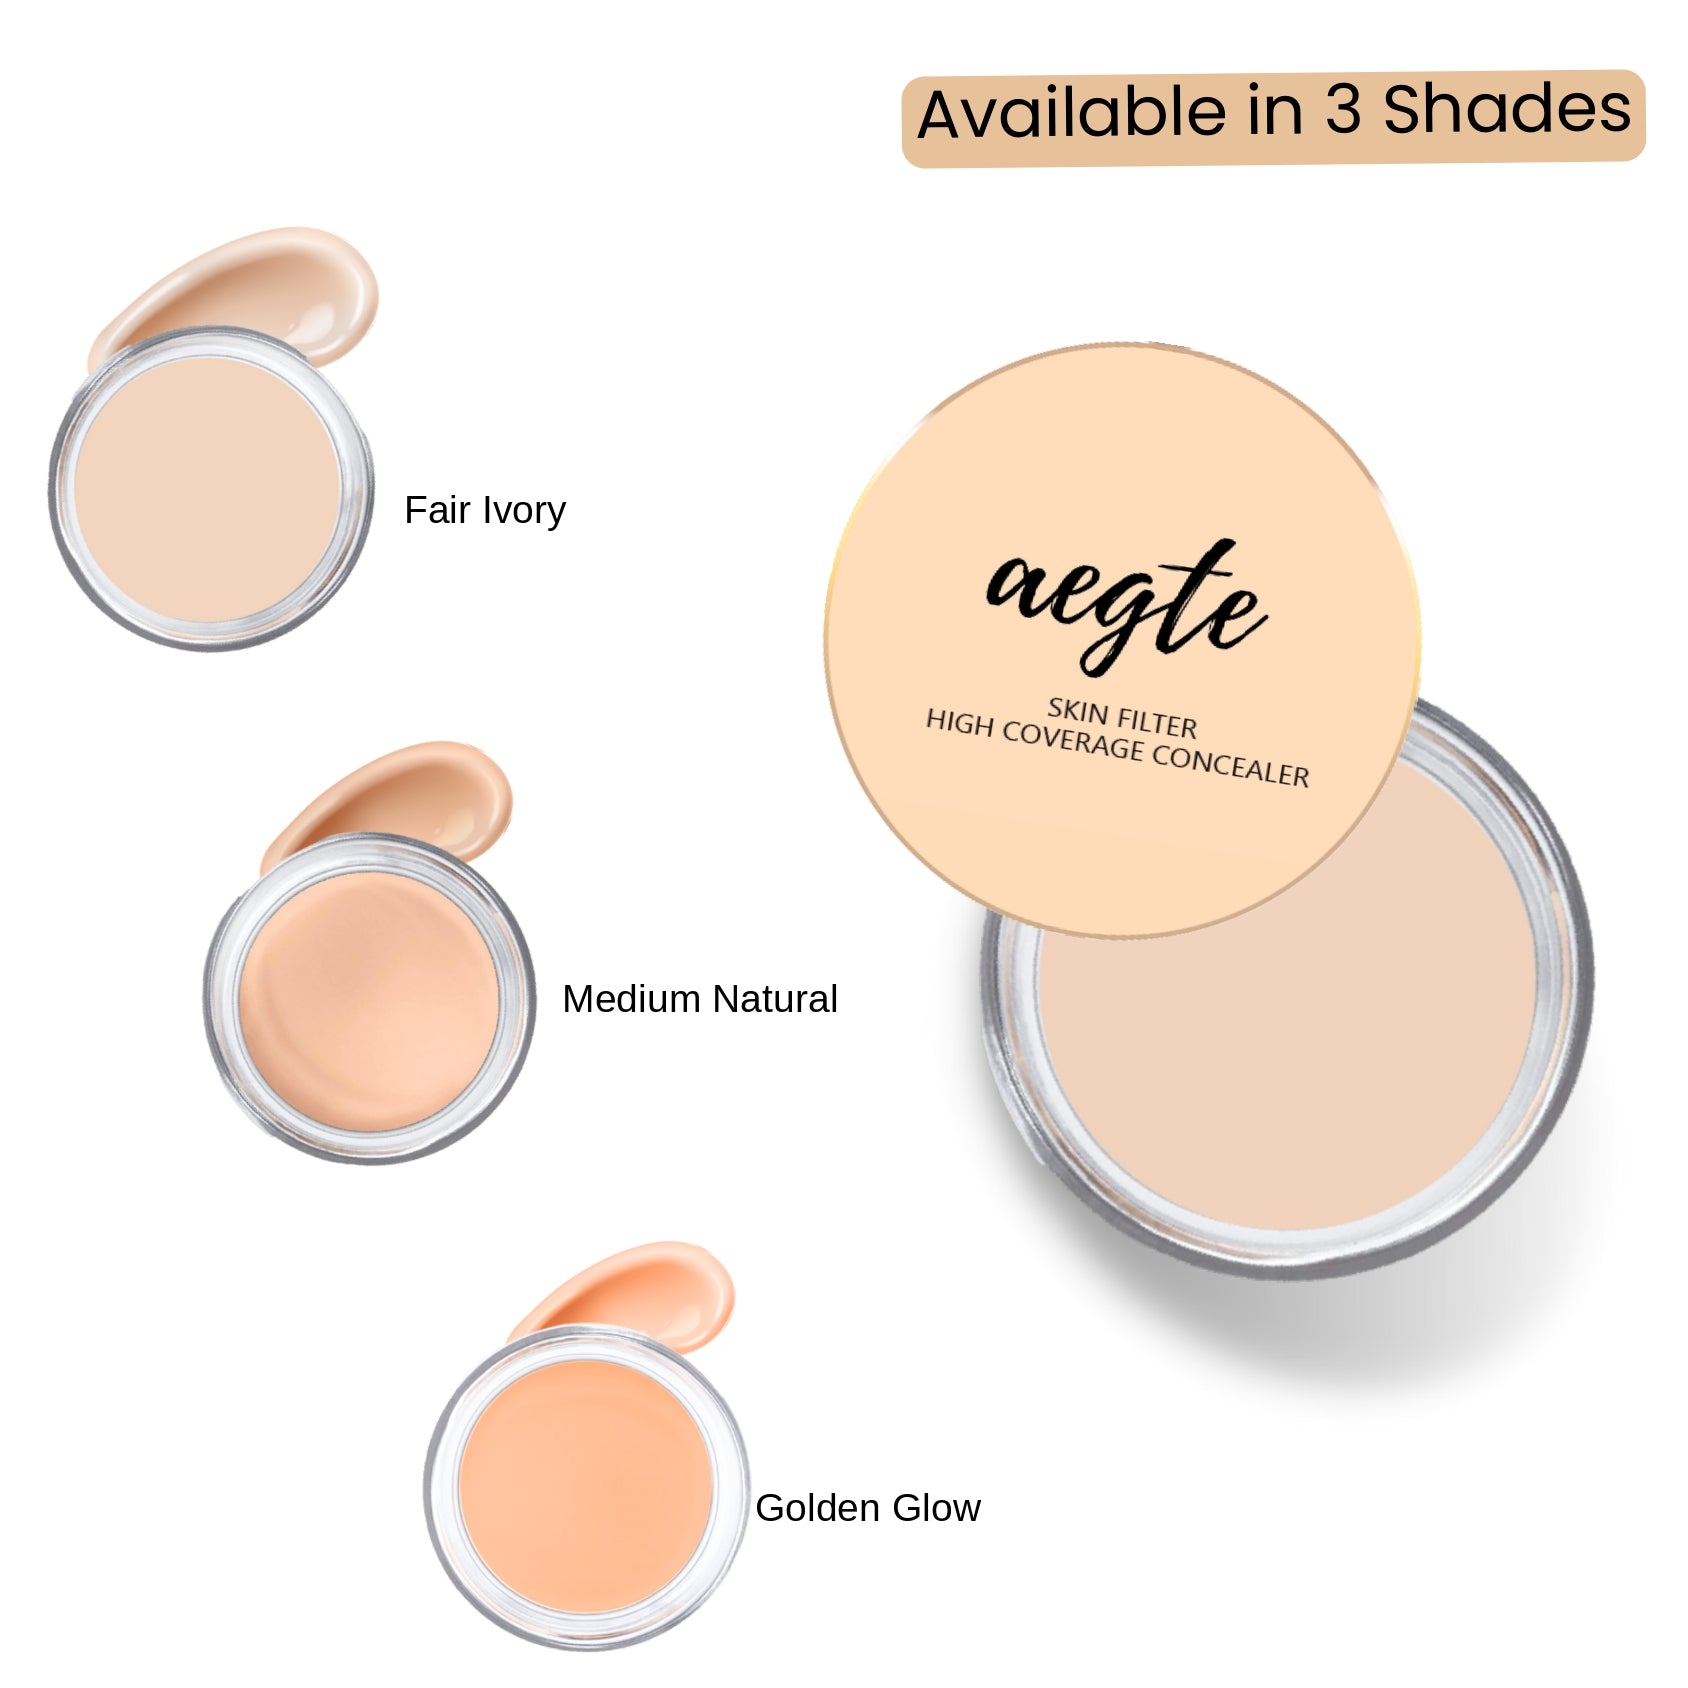 Aegte Combo of Dab and Fab Matte Compact Powder & Skin Filter High Coverage Concealer